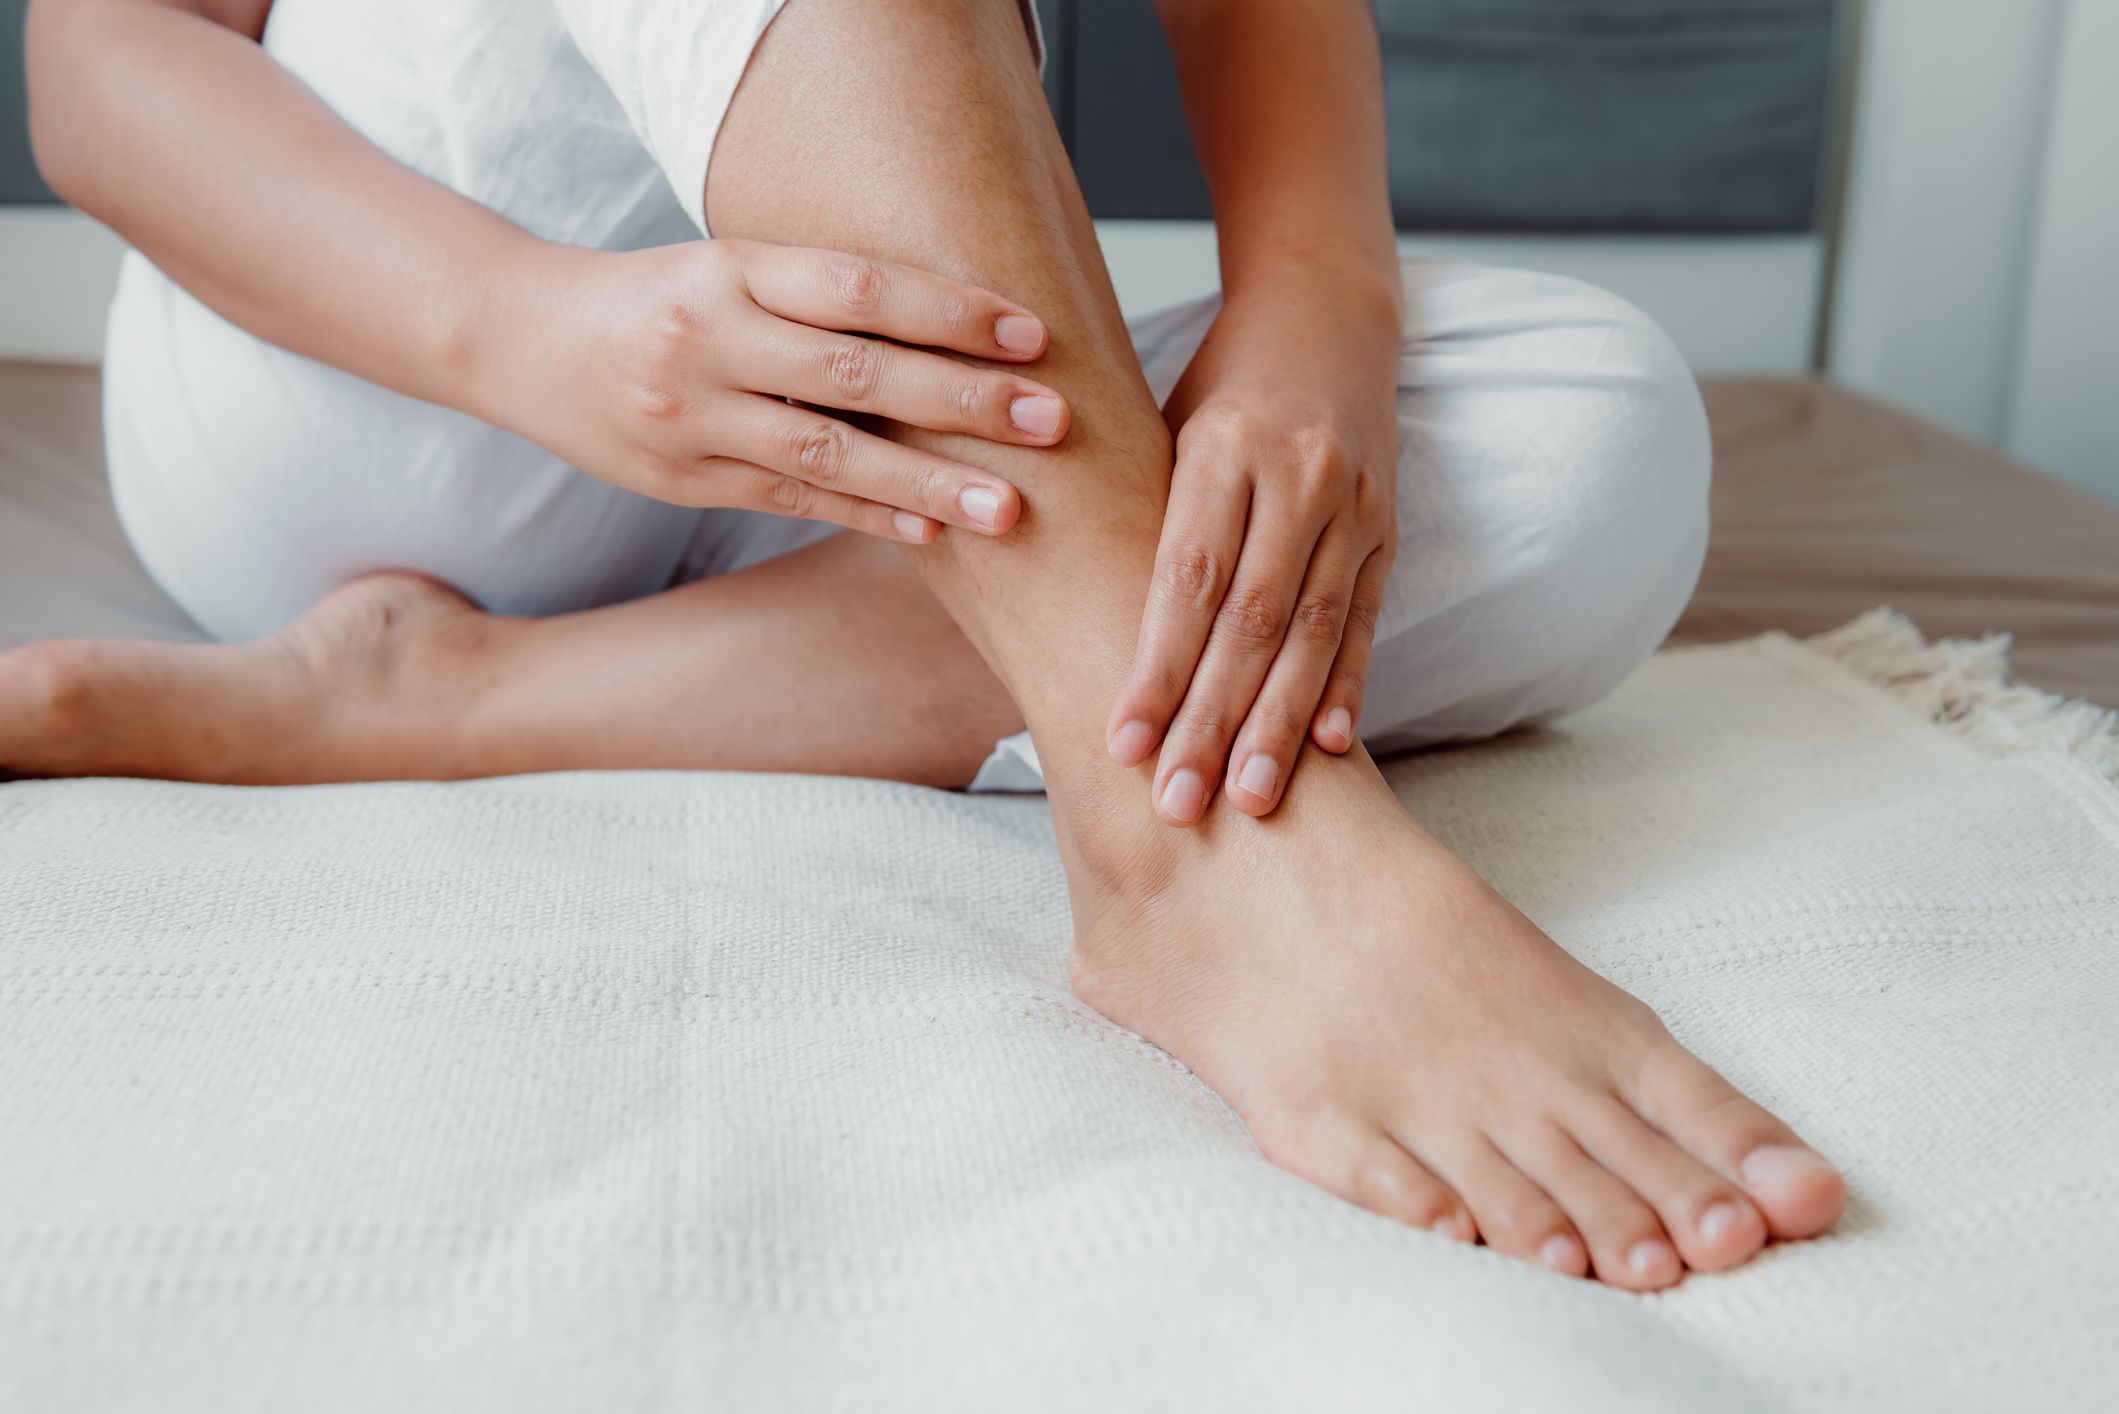 11 Reasons For Tingling In Your Feet - Why Are My Feet Tingling?